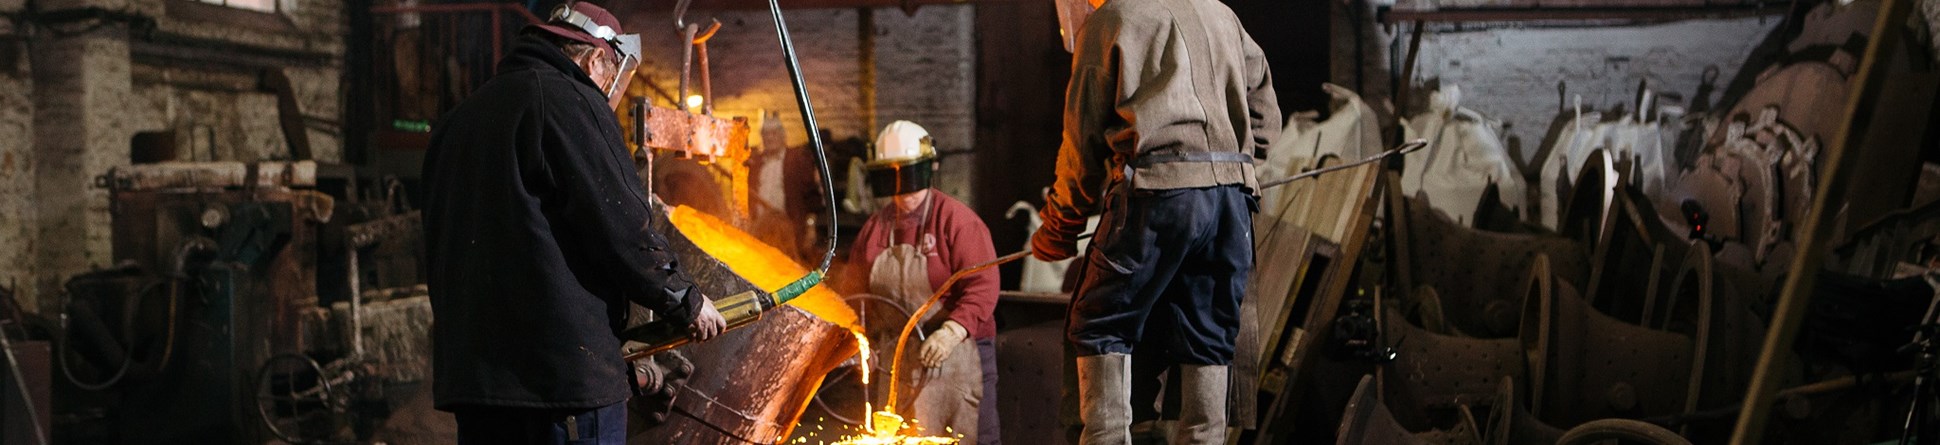 Three men pouring molten metal, demonstrating the bell casting process to a group of onlookers behind.